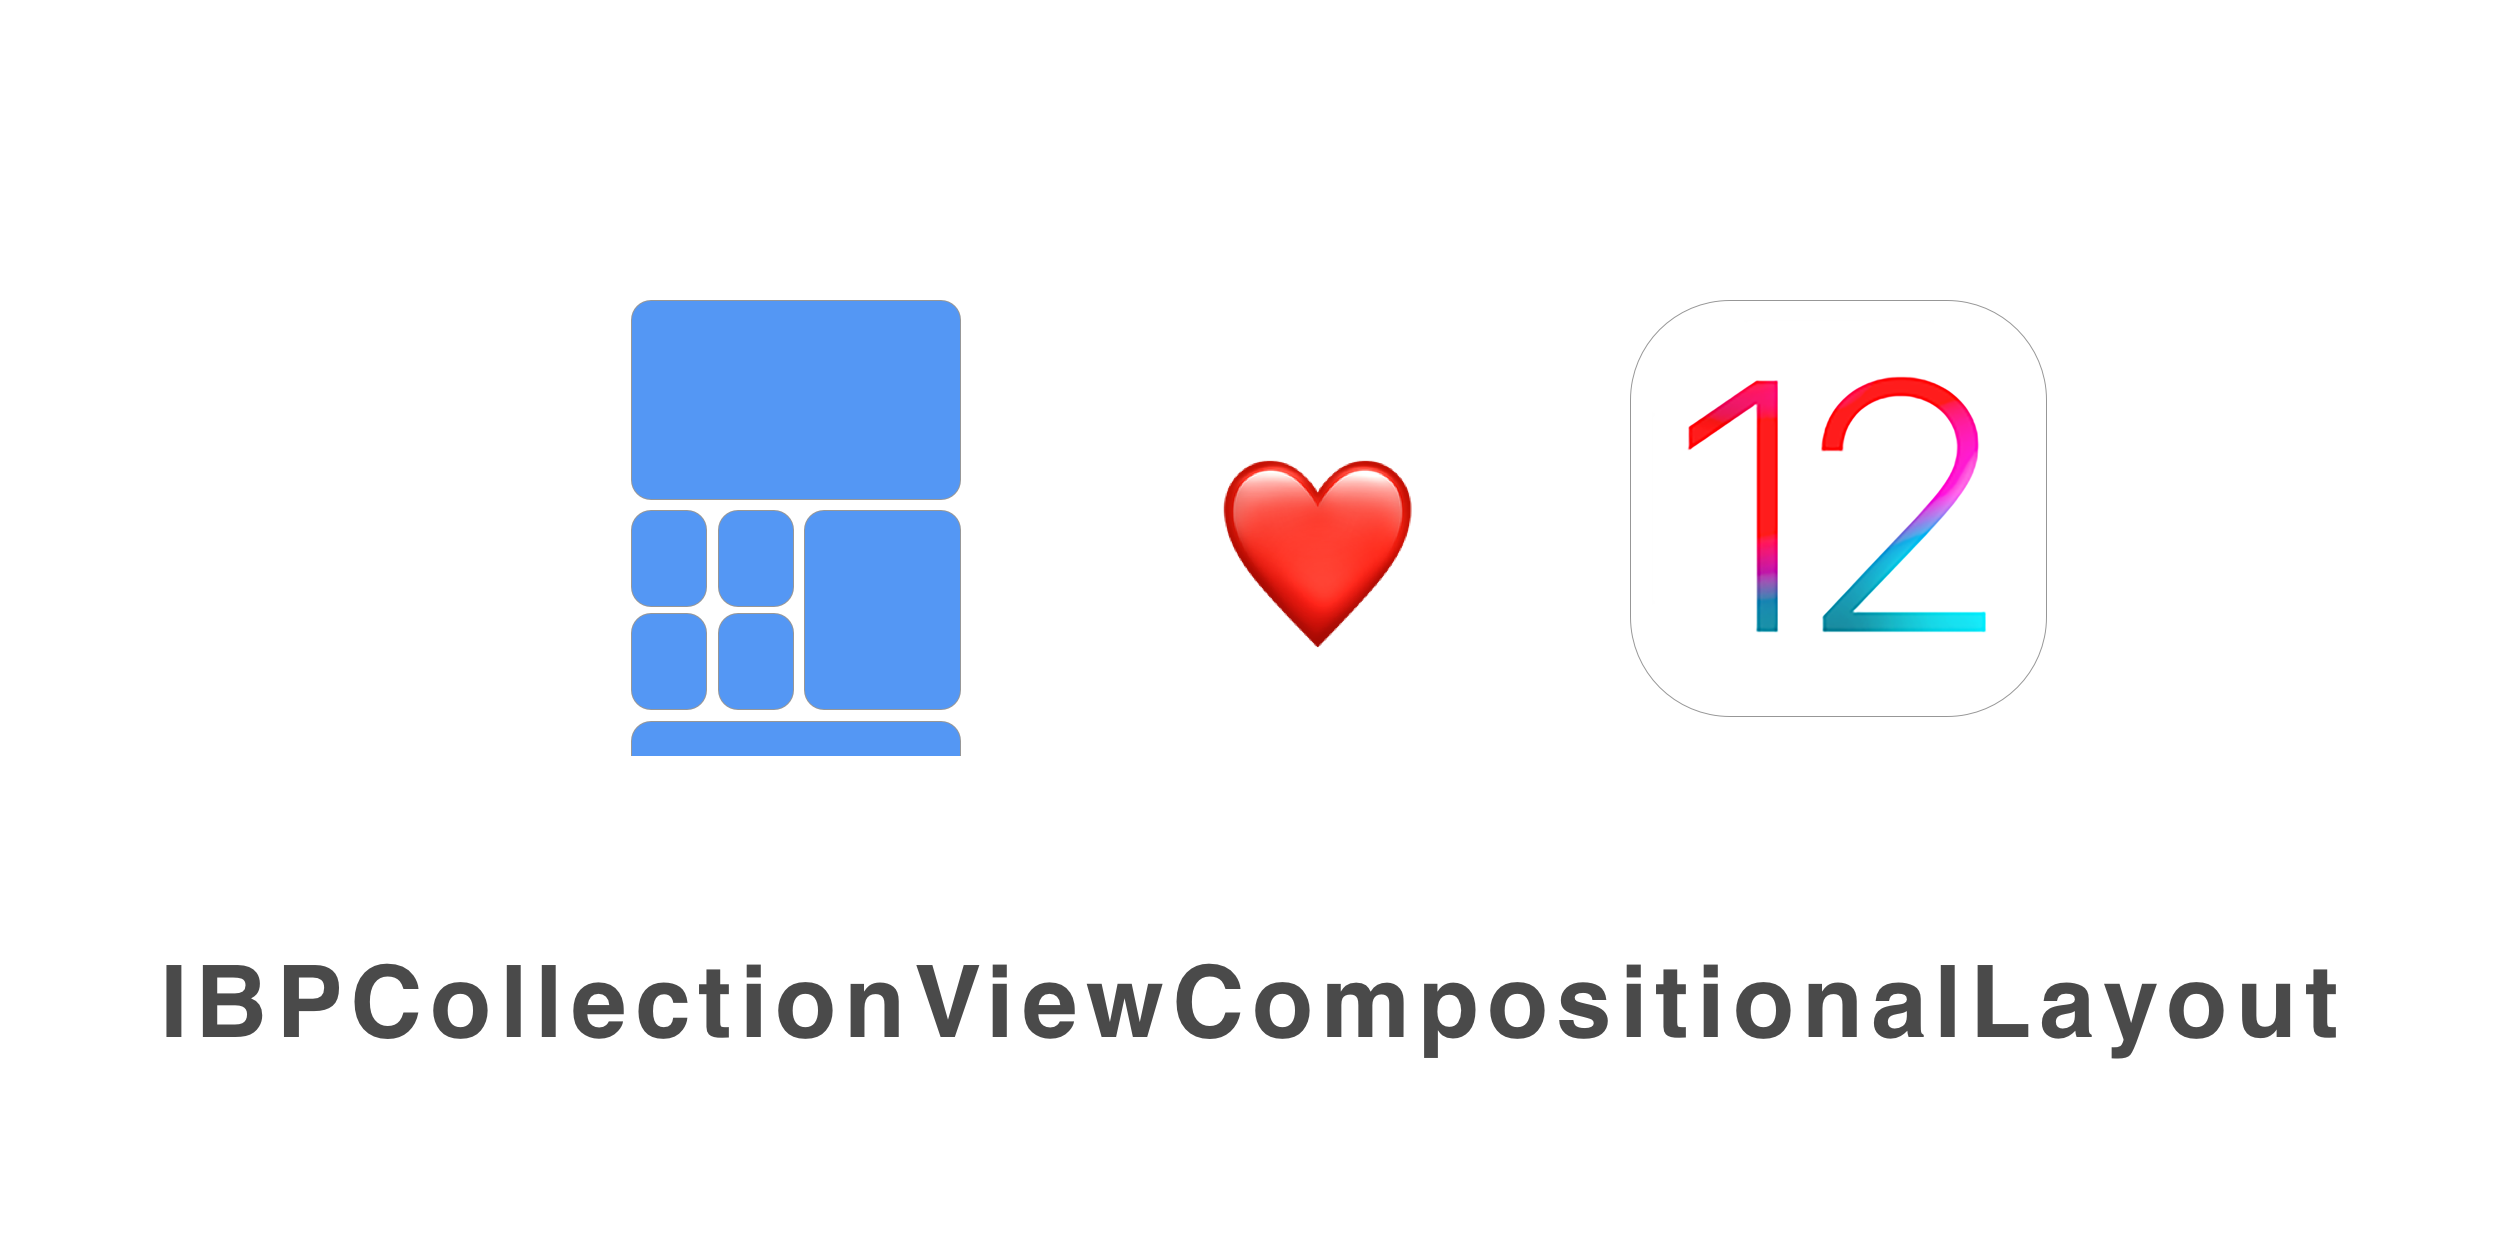 IBPCollectionViewCompositionalLayout